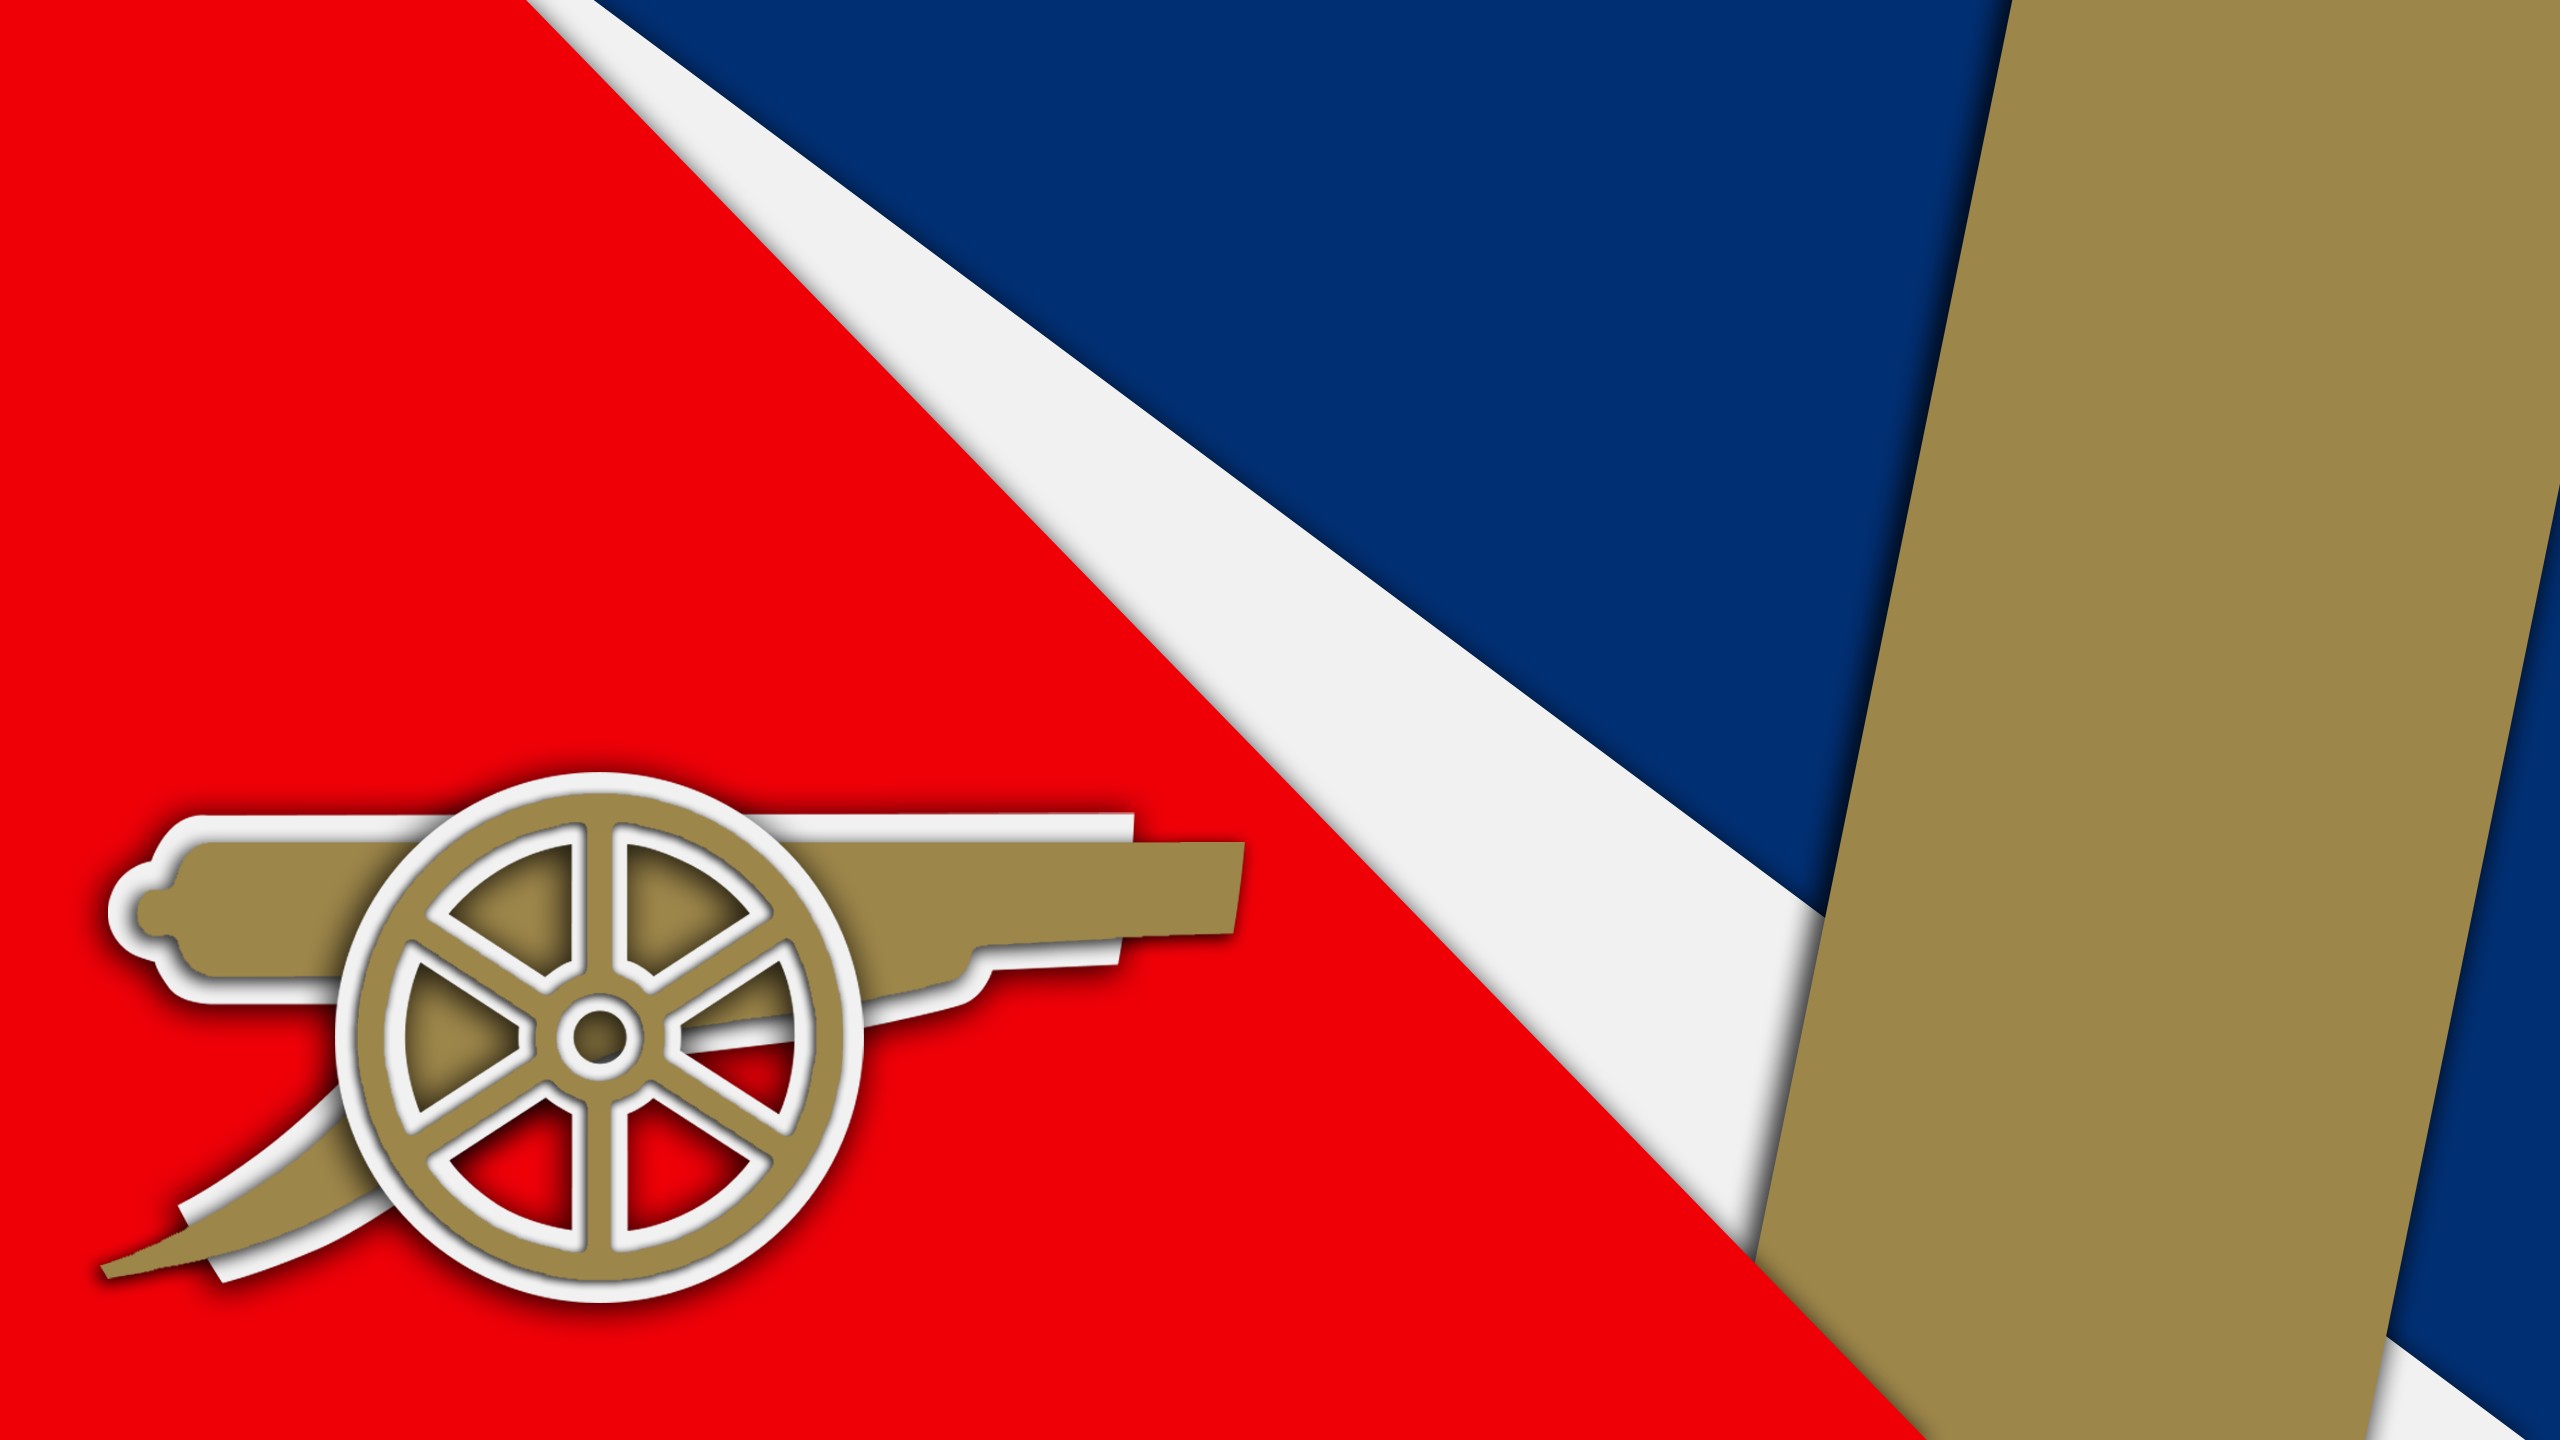 Arsenal, Arsenal Fc, Arsenal London, Gunners, Sport, Sports, Soccer, Sports club, Soccer clubs, Material style Wallpaper